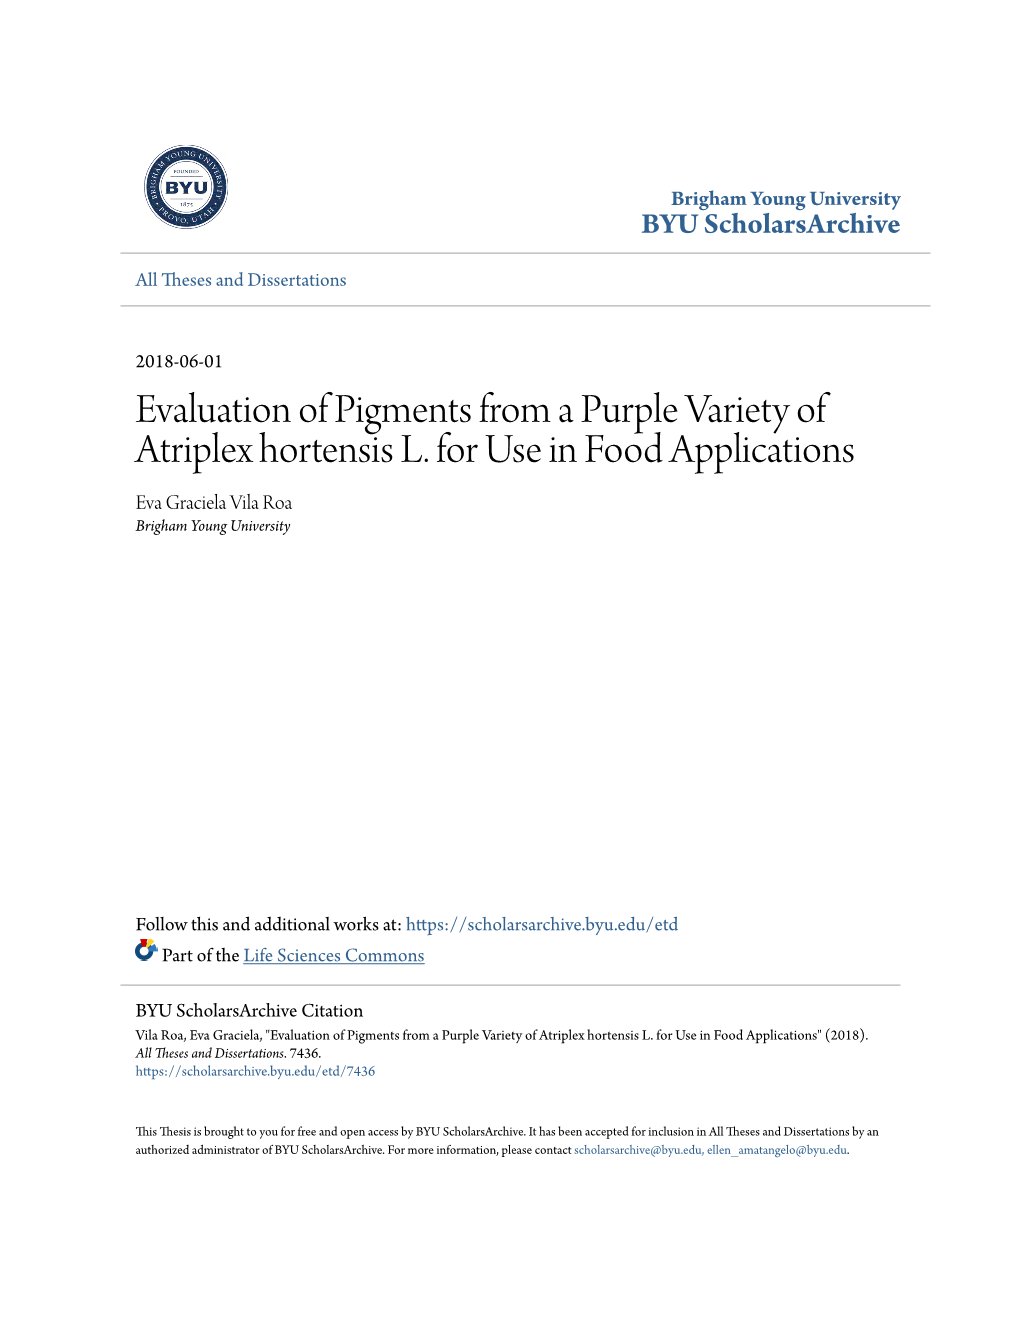 Evaluation of Pigments from a Purple Variety of Atriplex Hortensis L. for Use in Food Applications Eva Graciela Vila Roa Brigham Young University